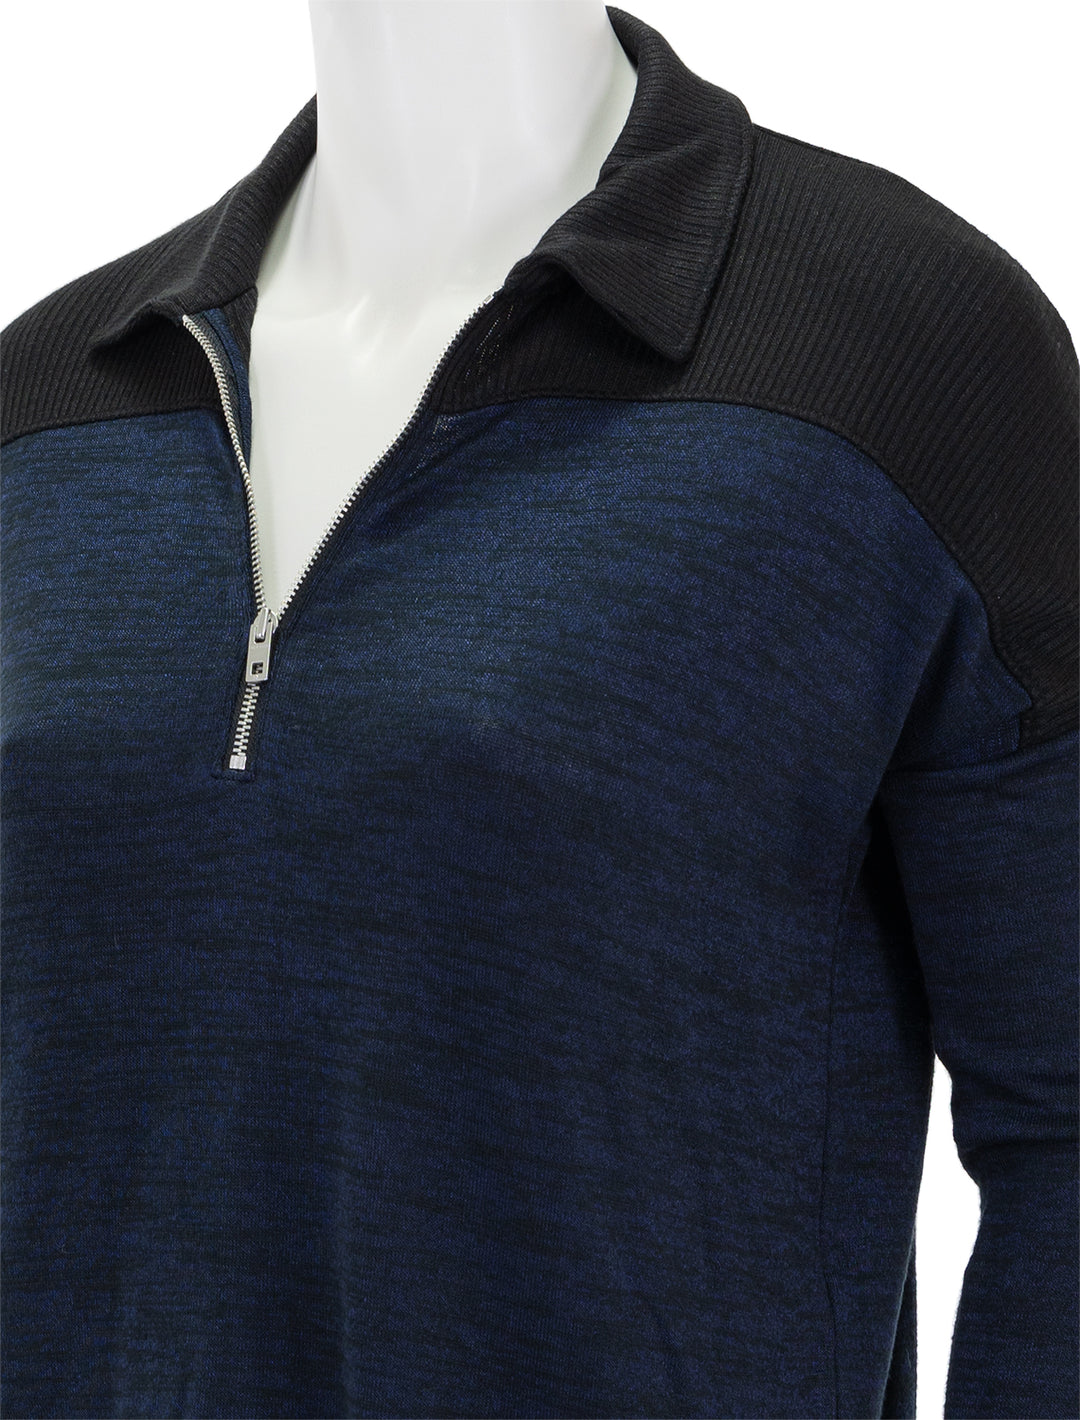 Close-up view of Rag & Bone's the knit zip polo in black.